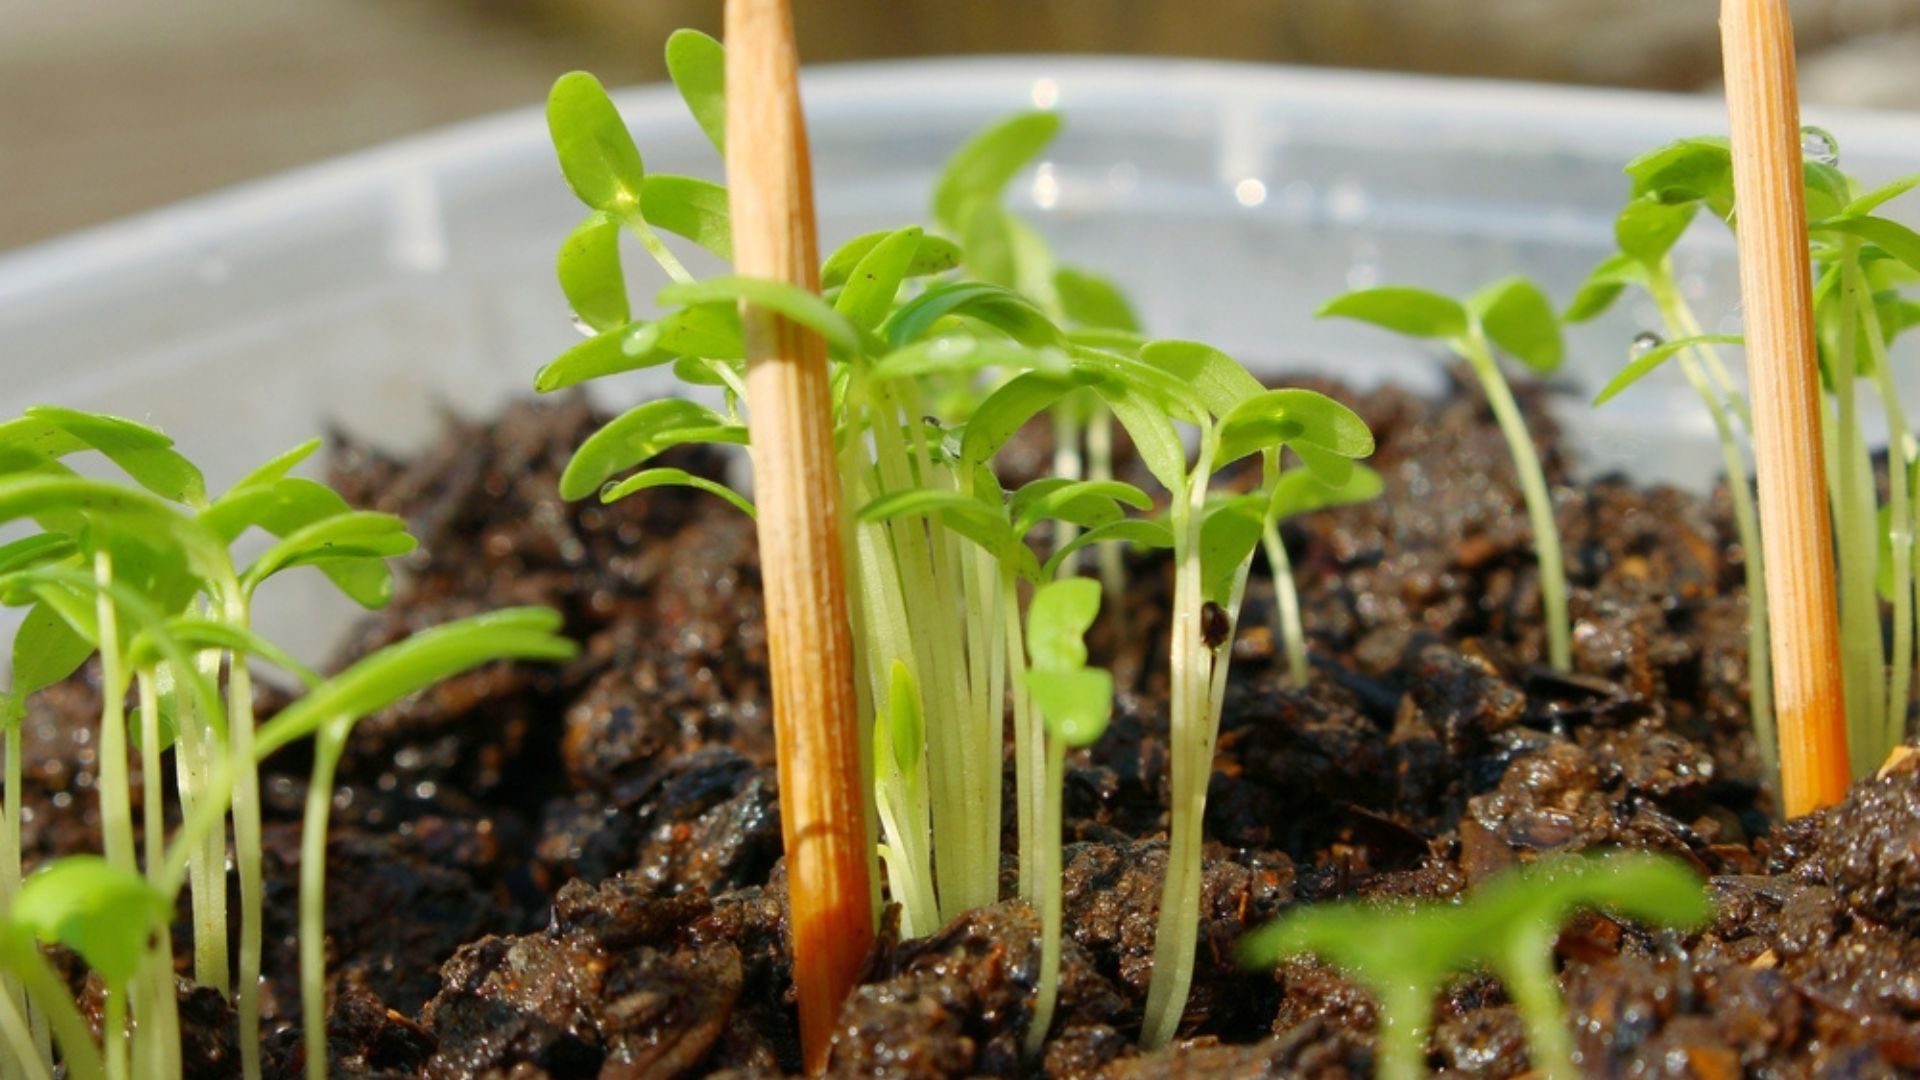 Track Moisture Levels And Keep Pests At Bay By Simply Placing A Toothpick Next To Your Seedlings